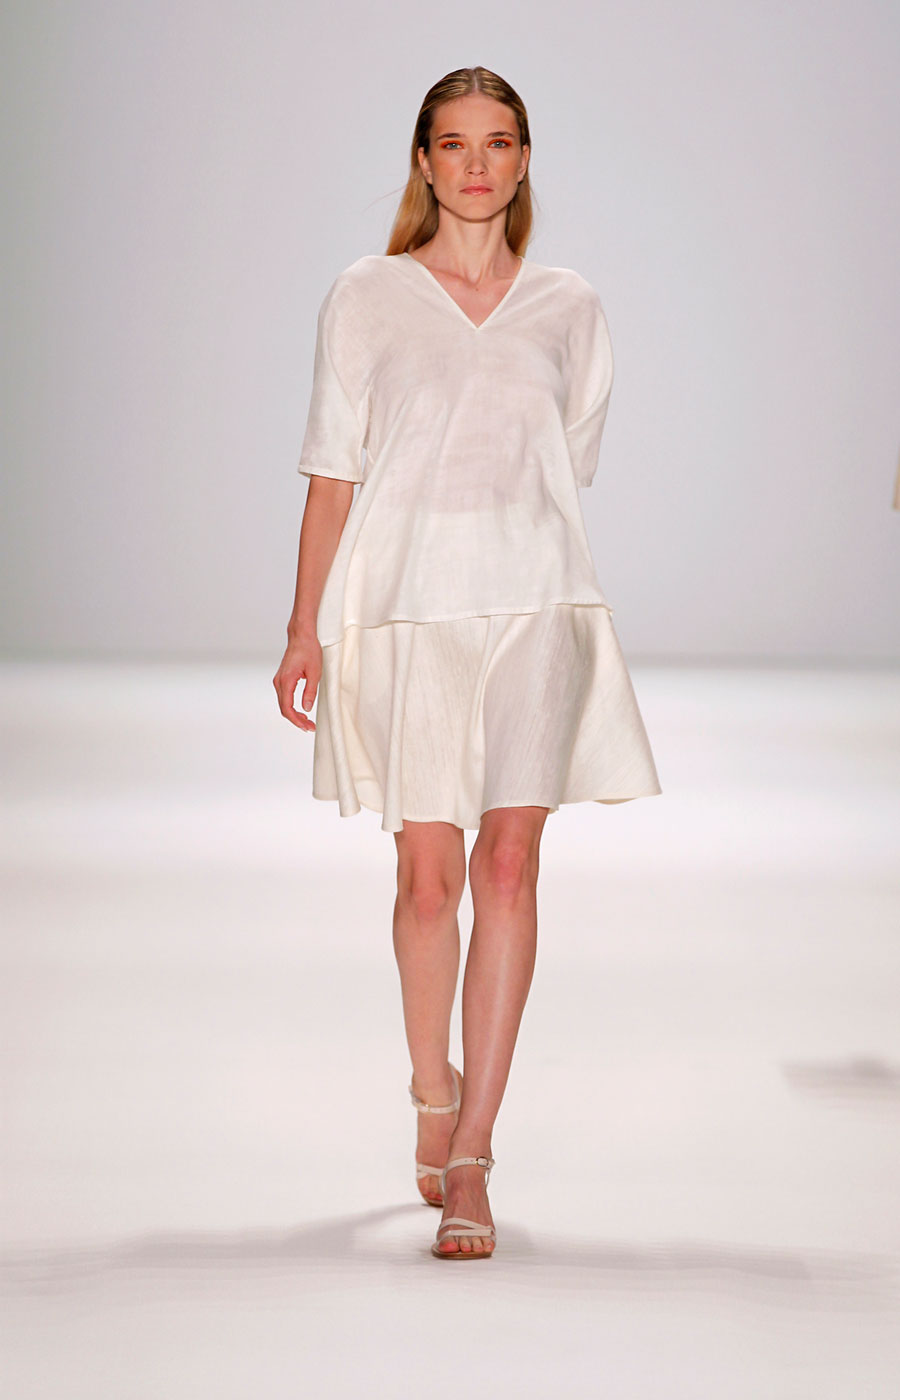 Spring/Summer 2012 by Perret Schaad (2)